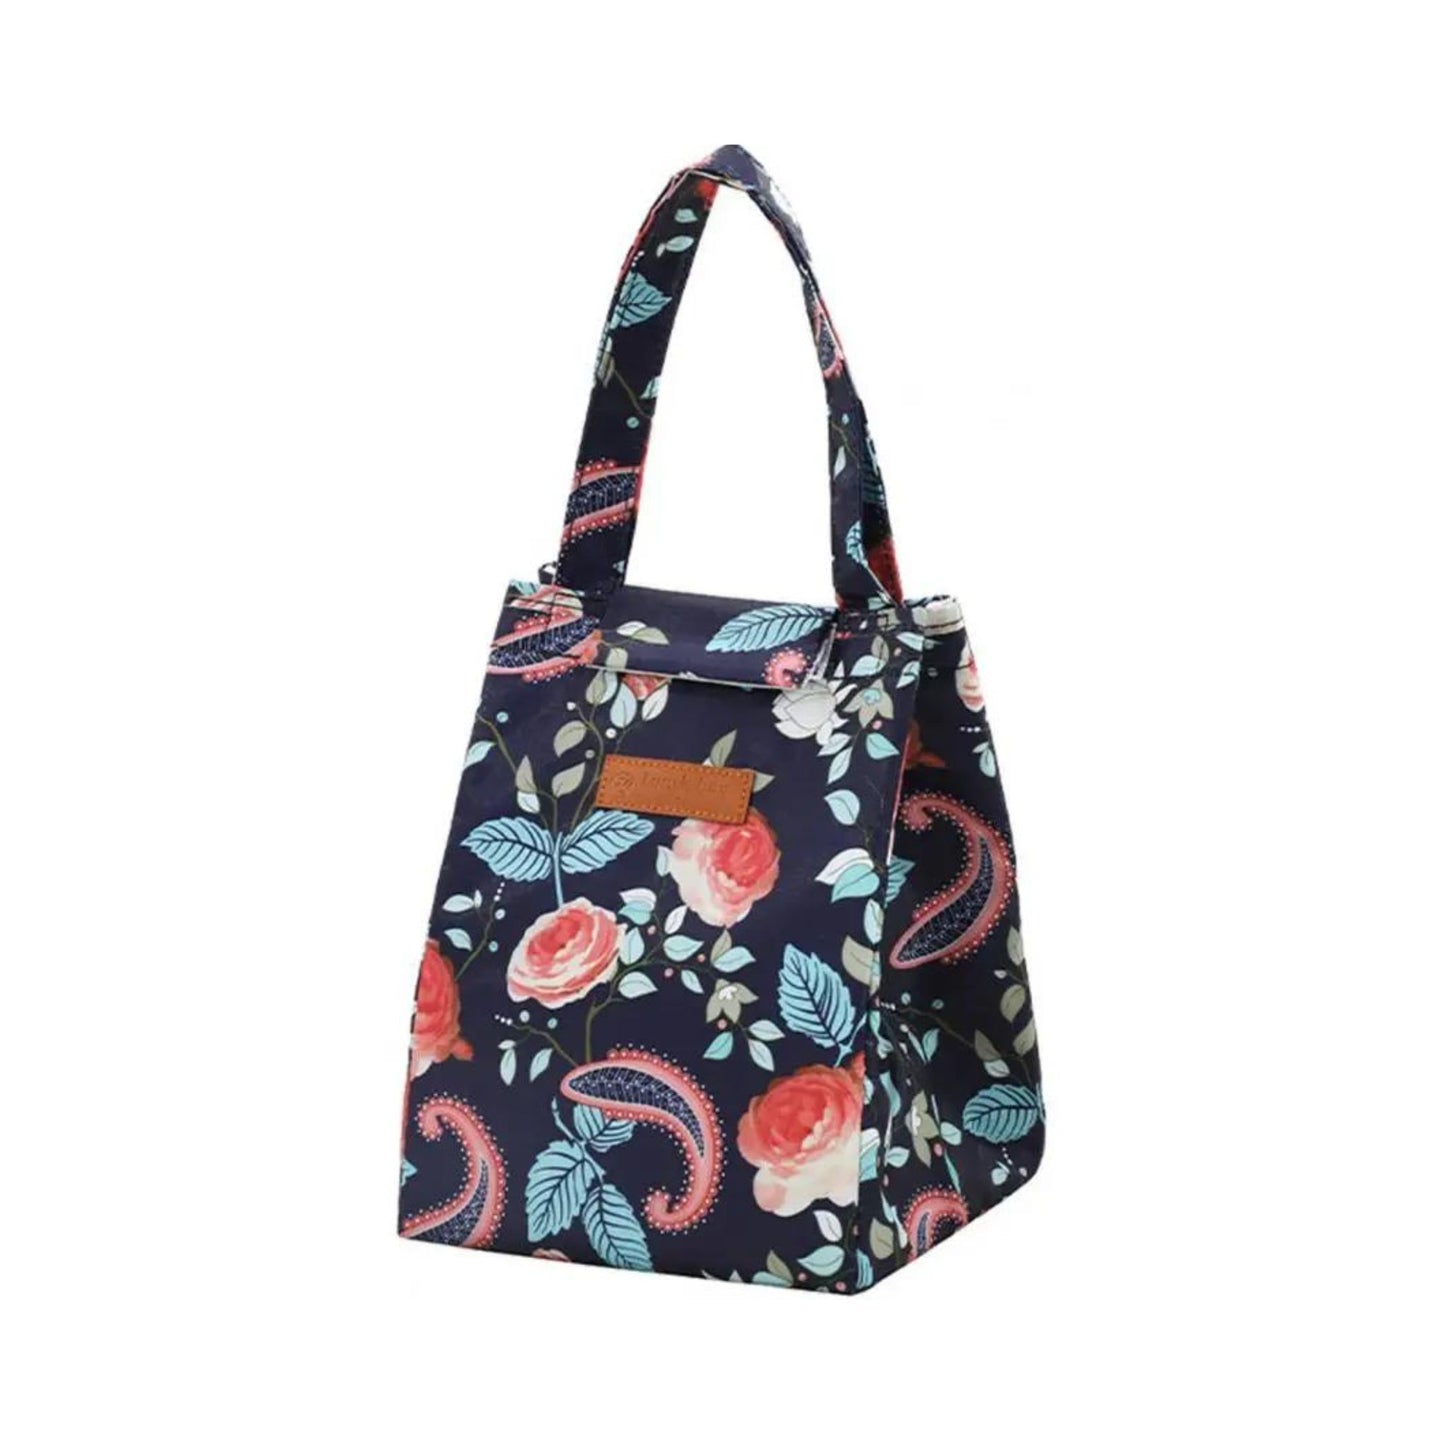 JM2303 Multi-Print Insulated Lunch Tote Bag